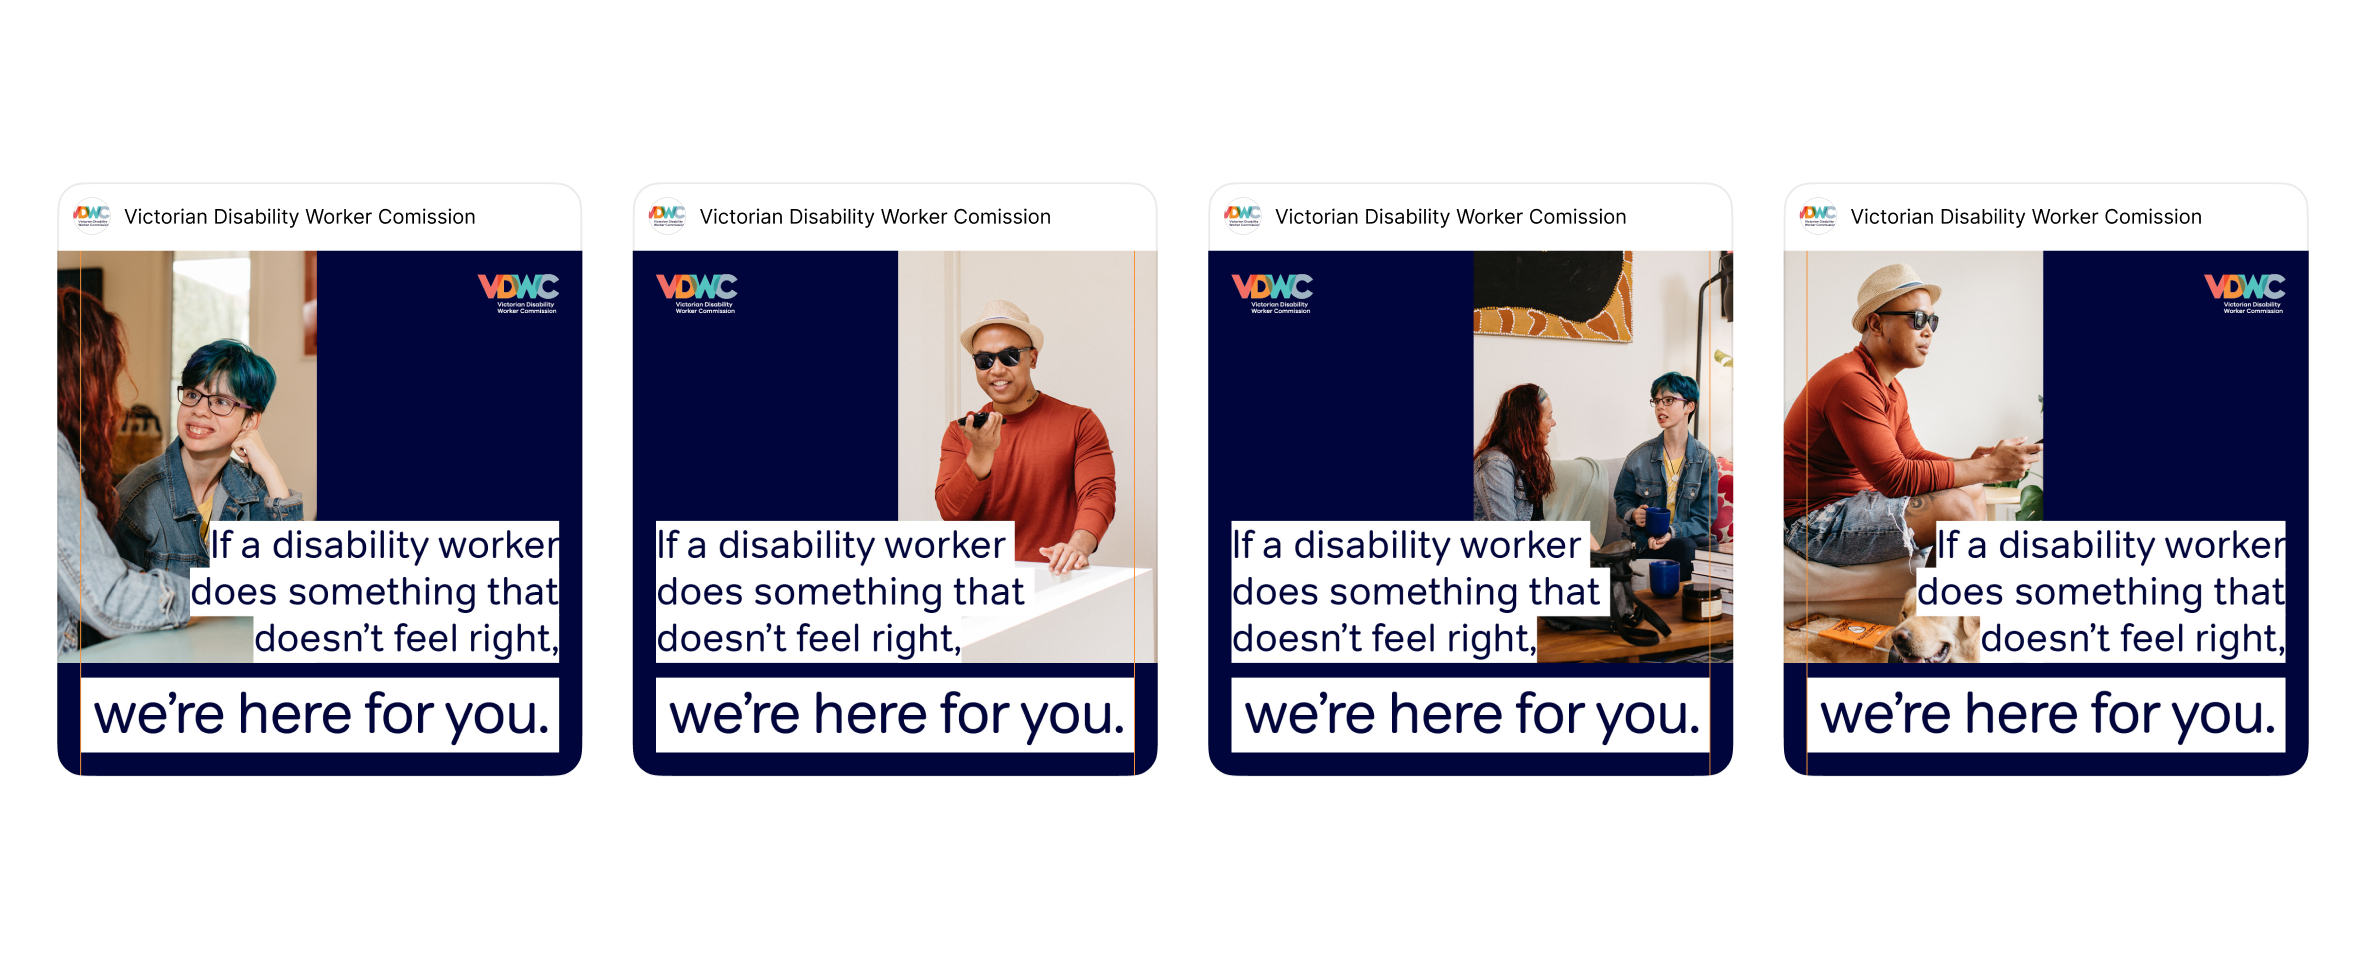 Four social media posts, each depicting a person with a disability and the campaign slogan.